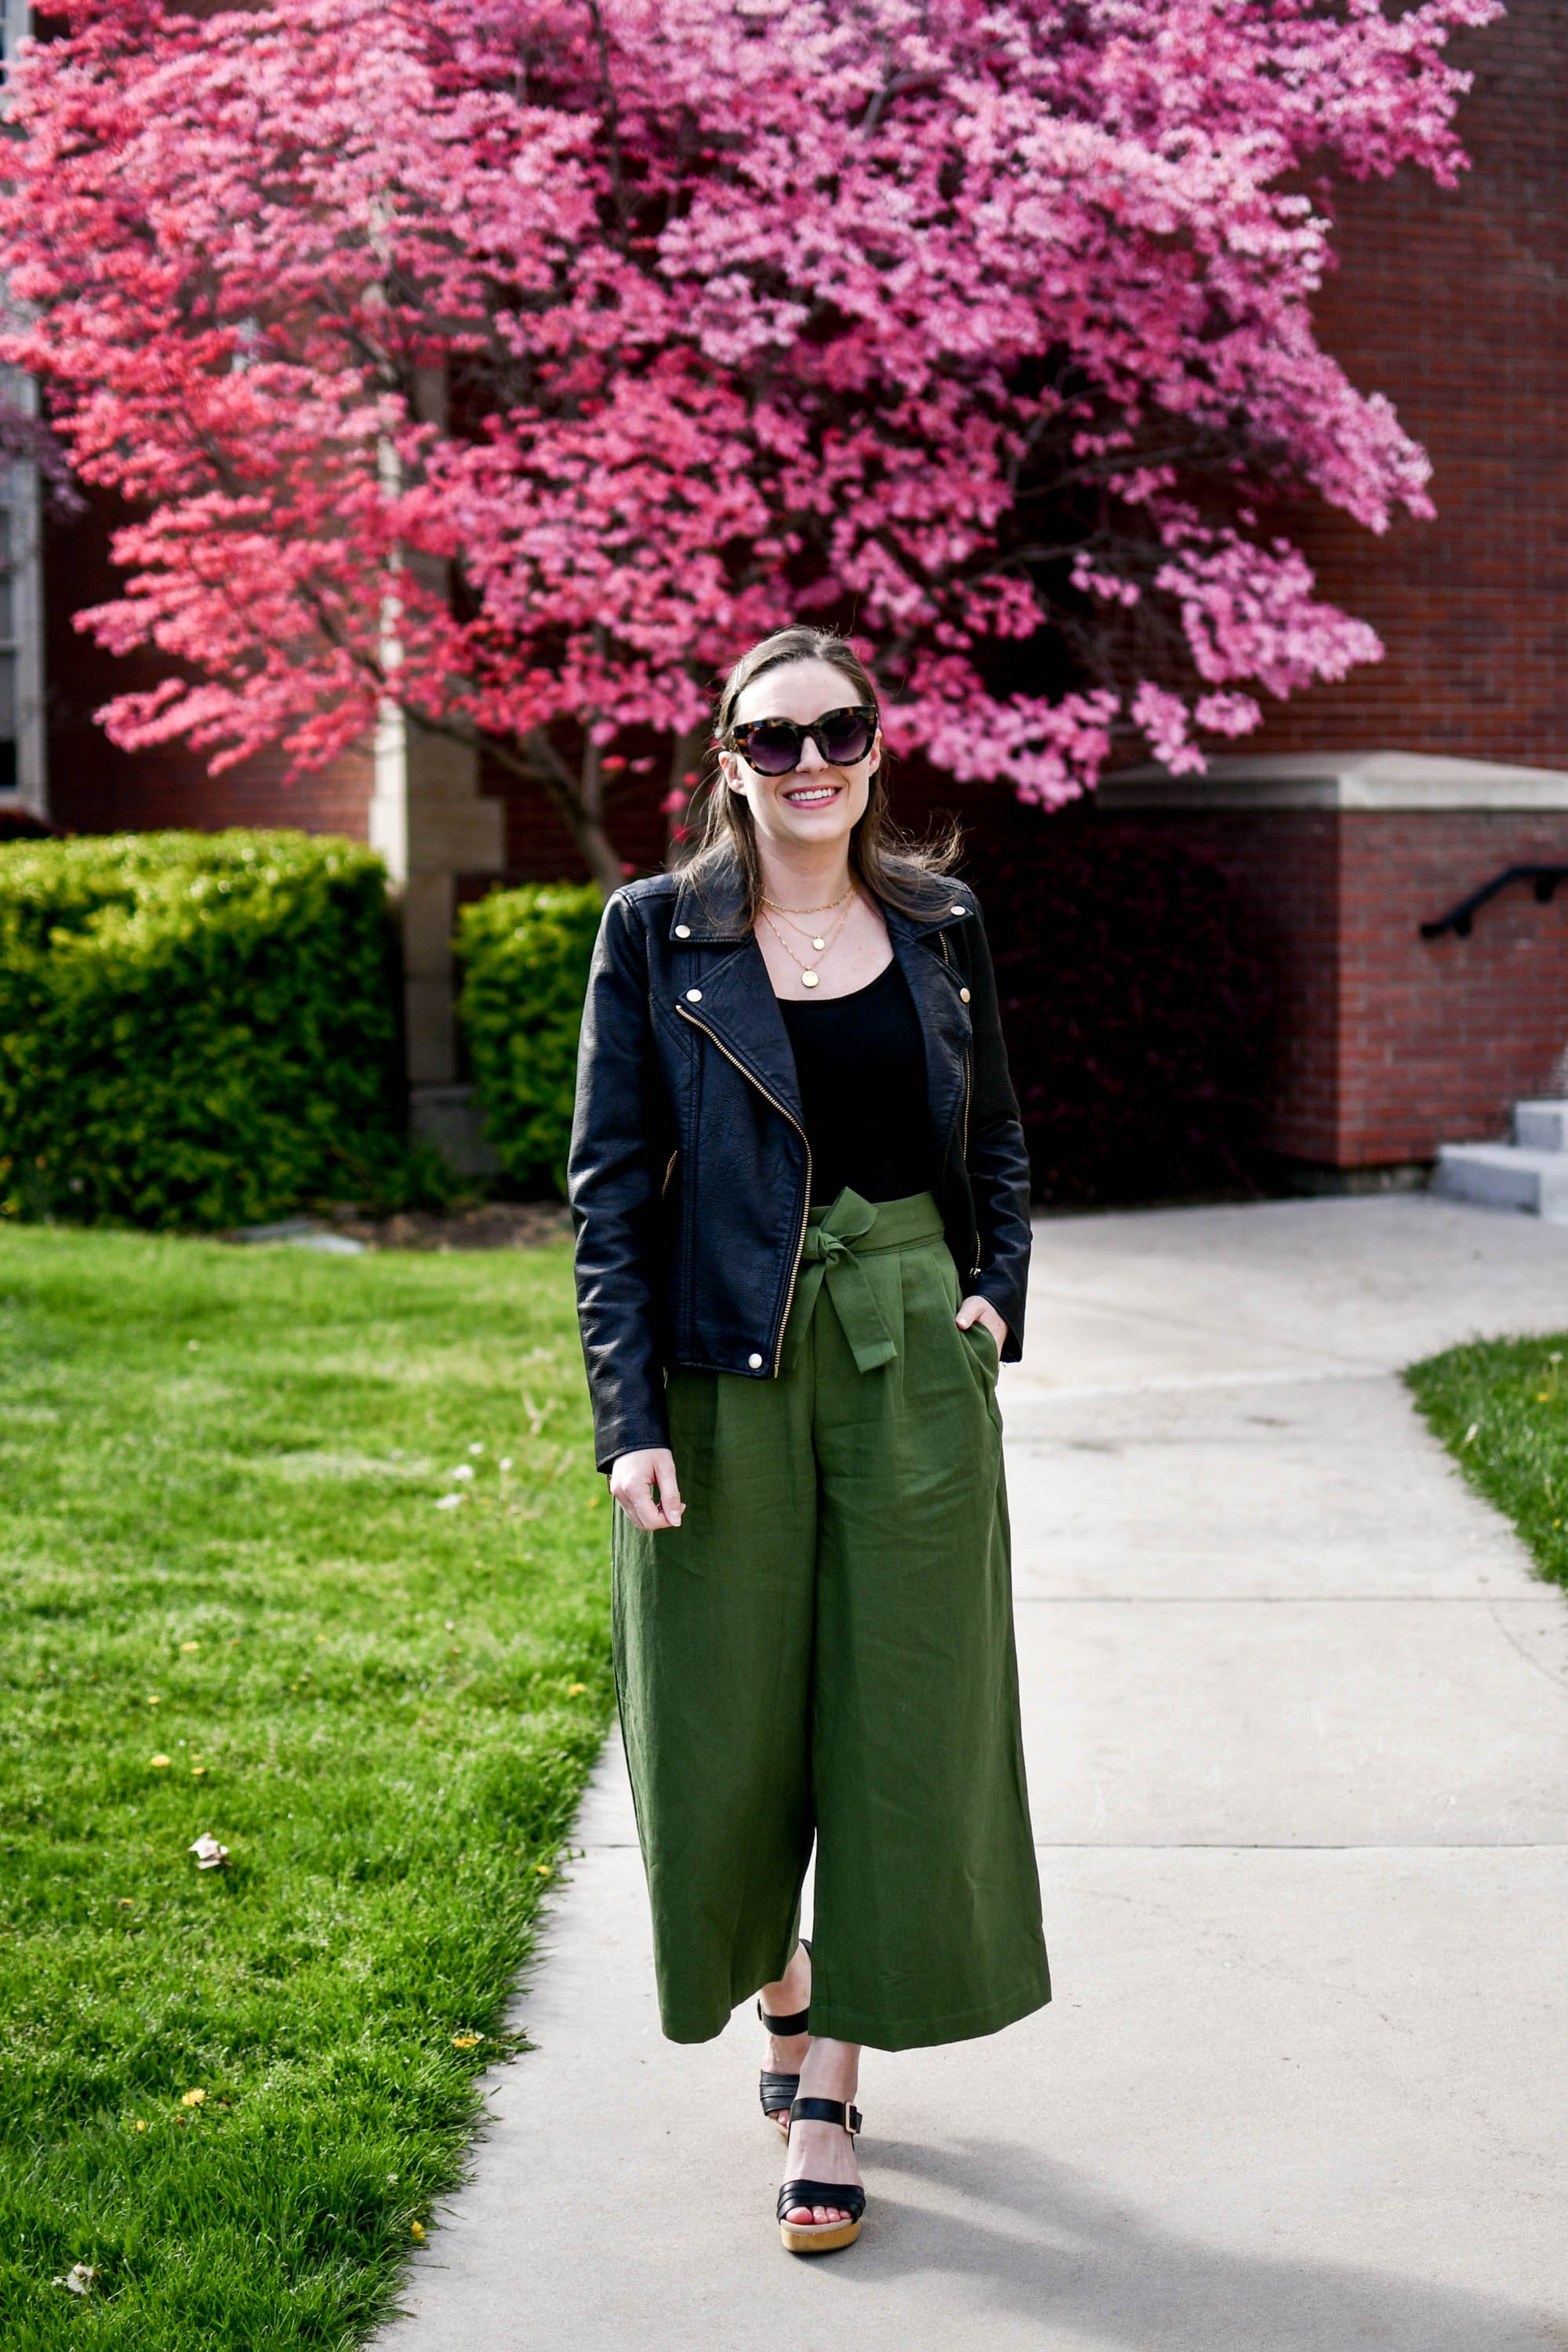 How to Style Wide Leg Pants if You're Petite